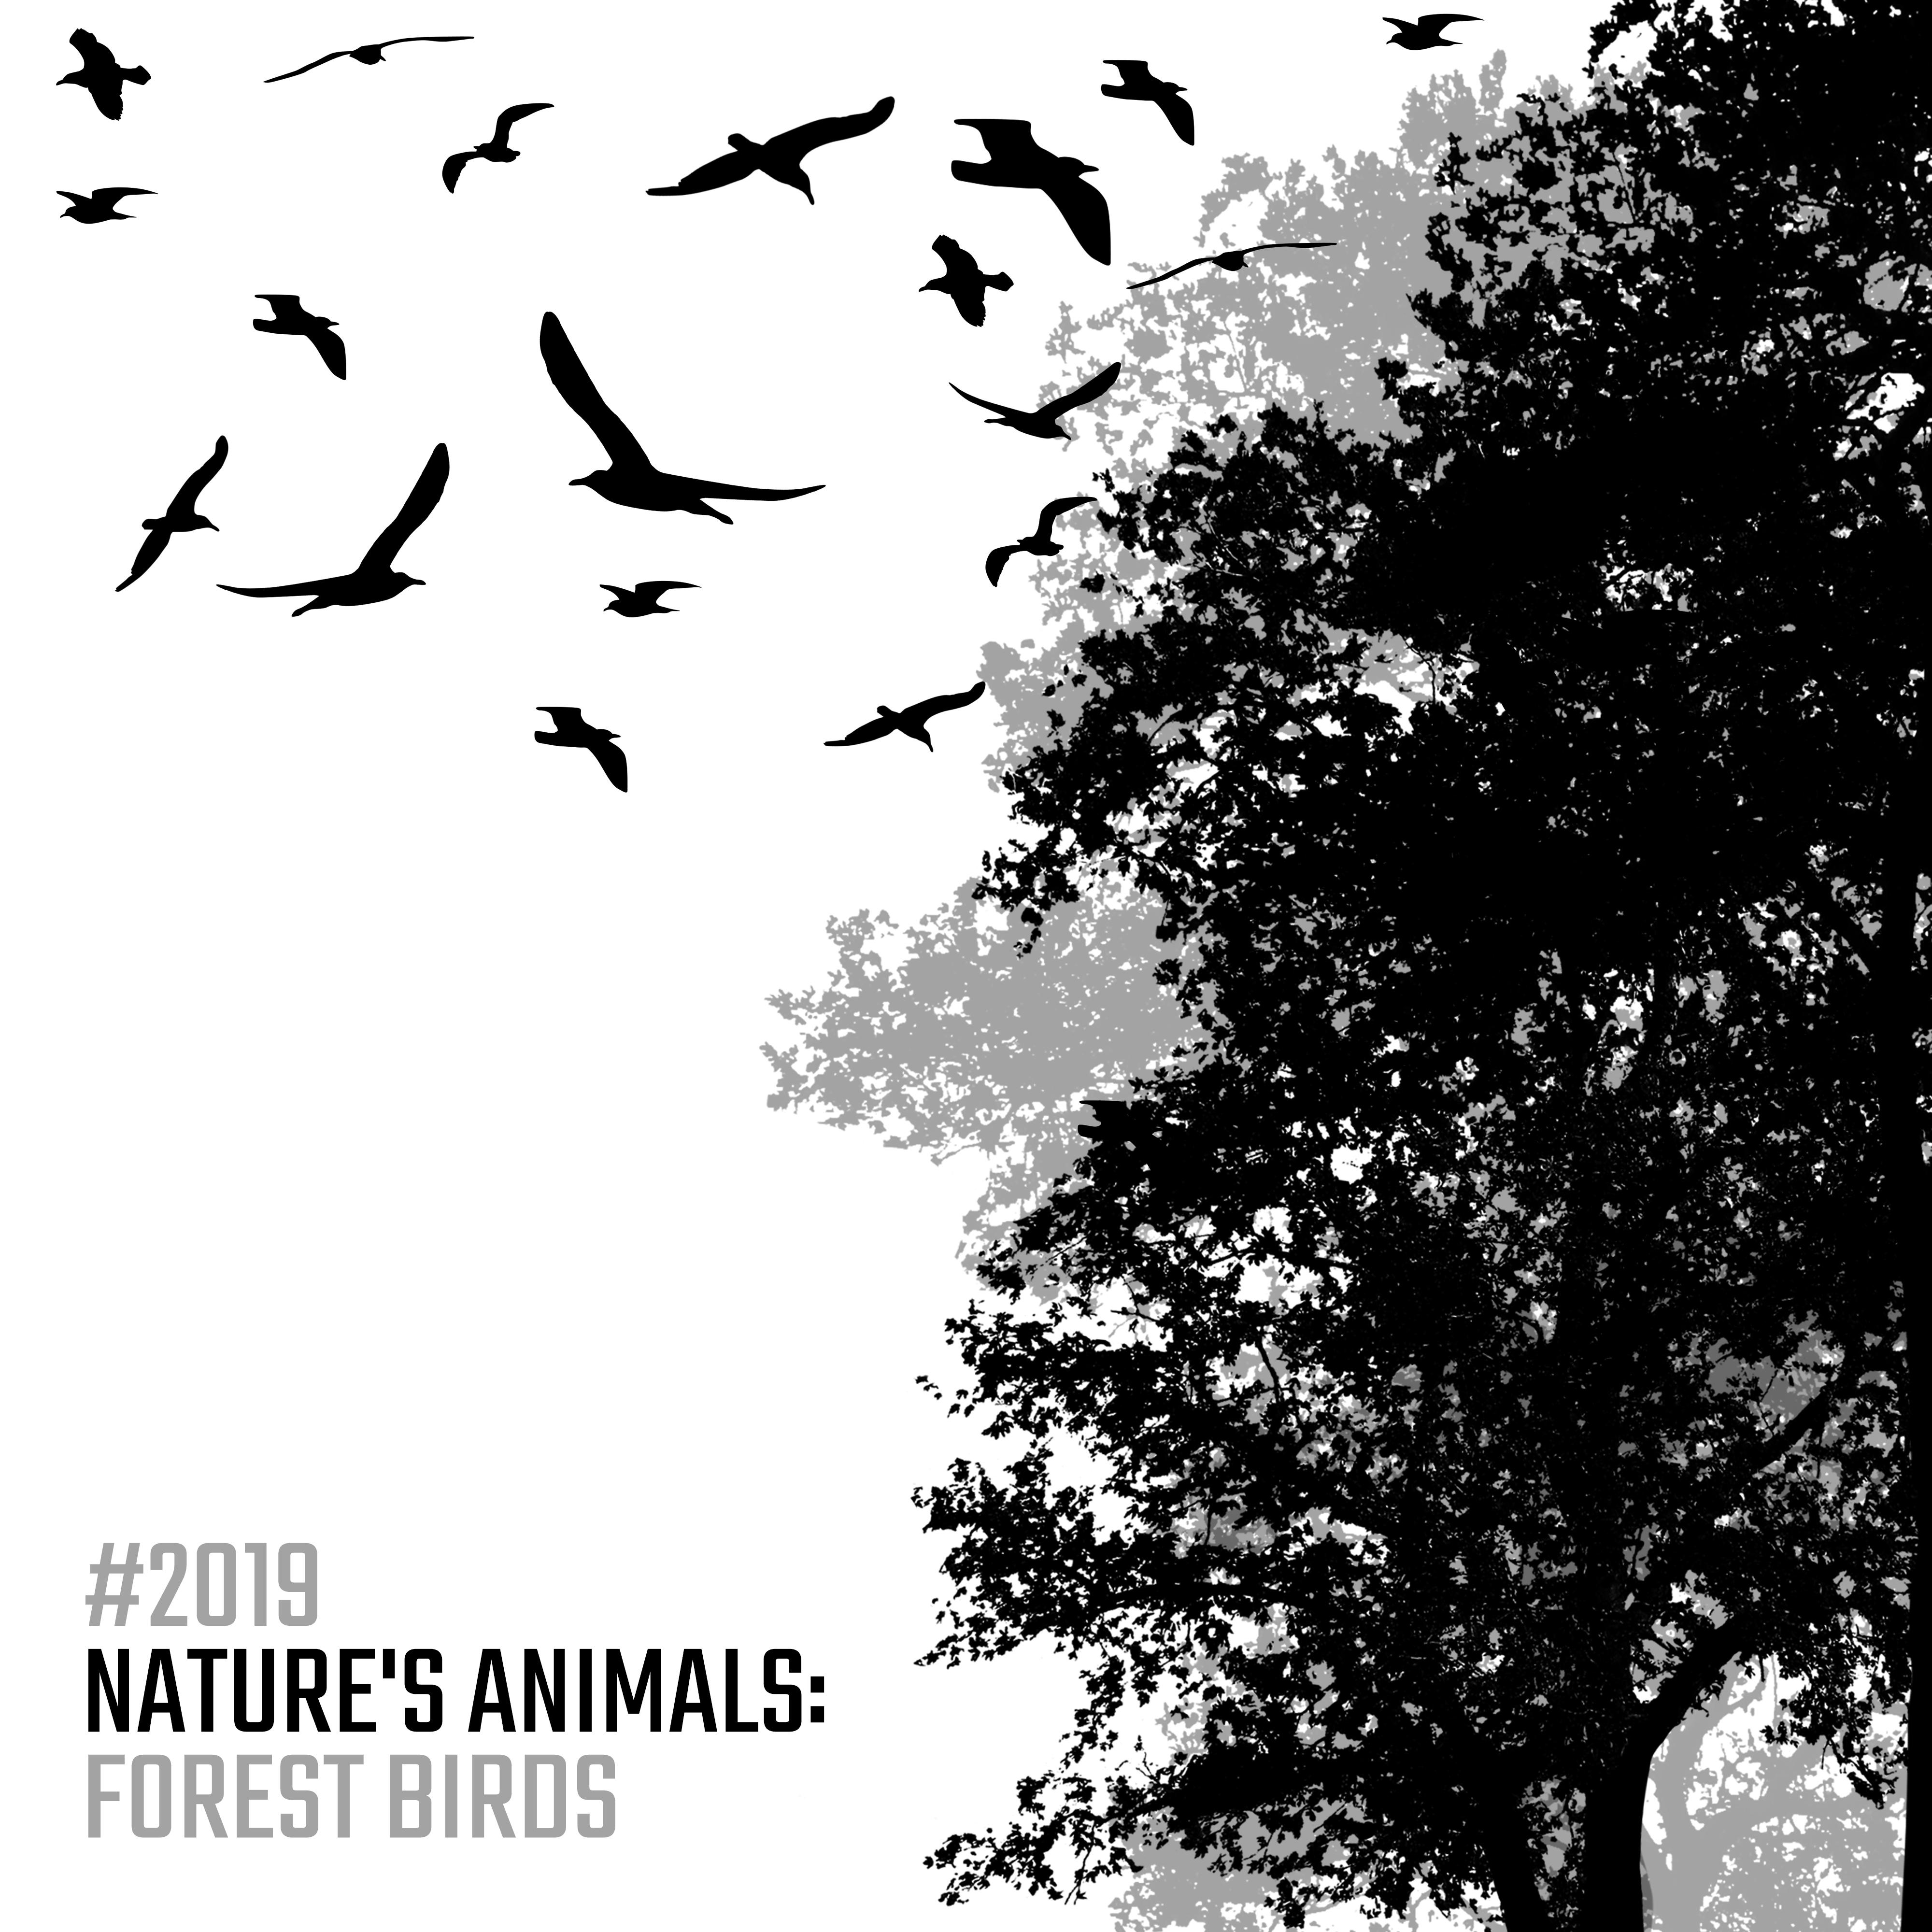 #2019 Nature's Animals: Forest Birds – Compilation of New Age Music with the Sounds of Birds and Piano Compositions